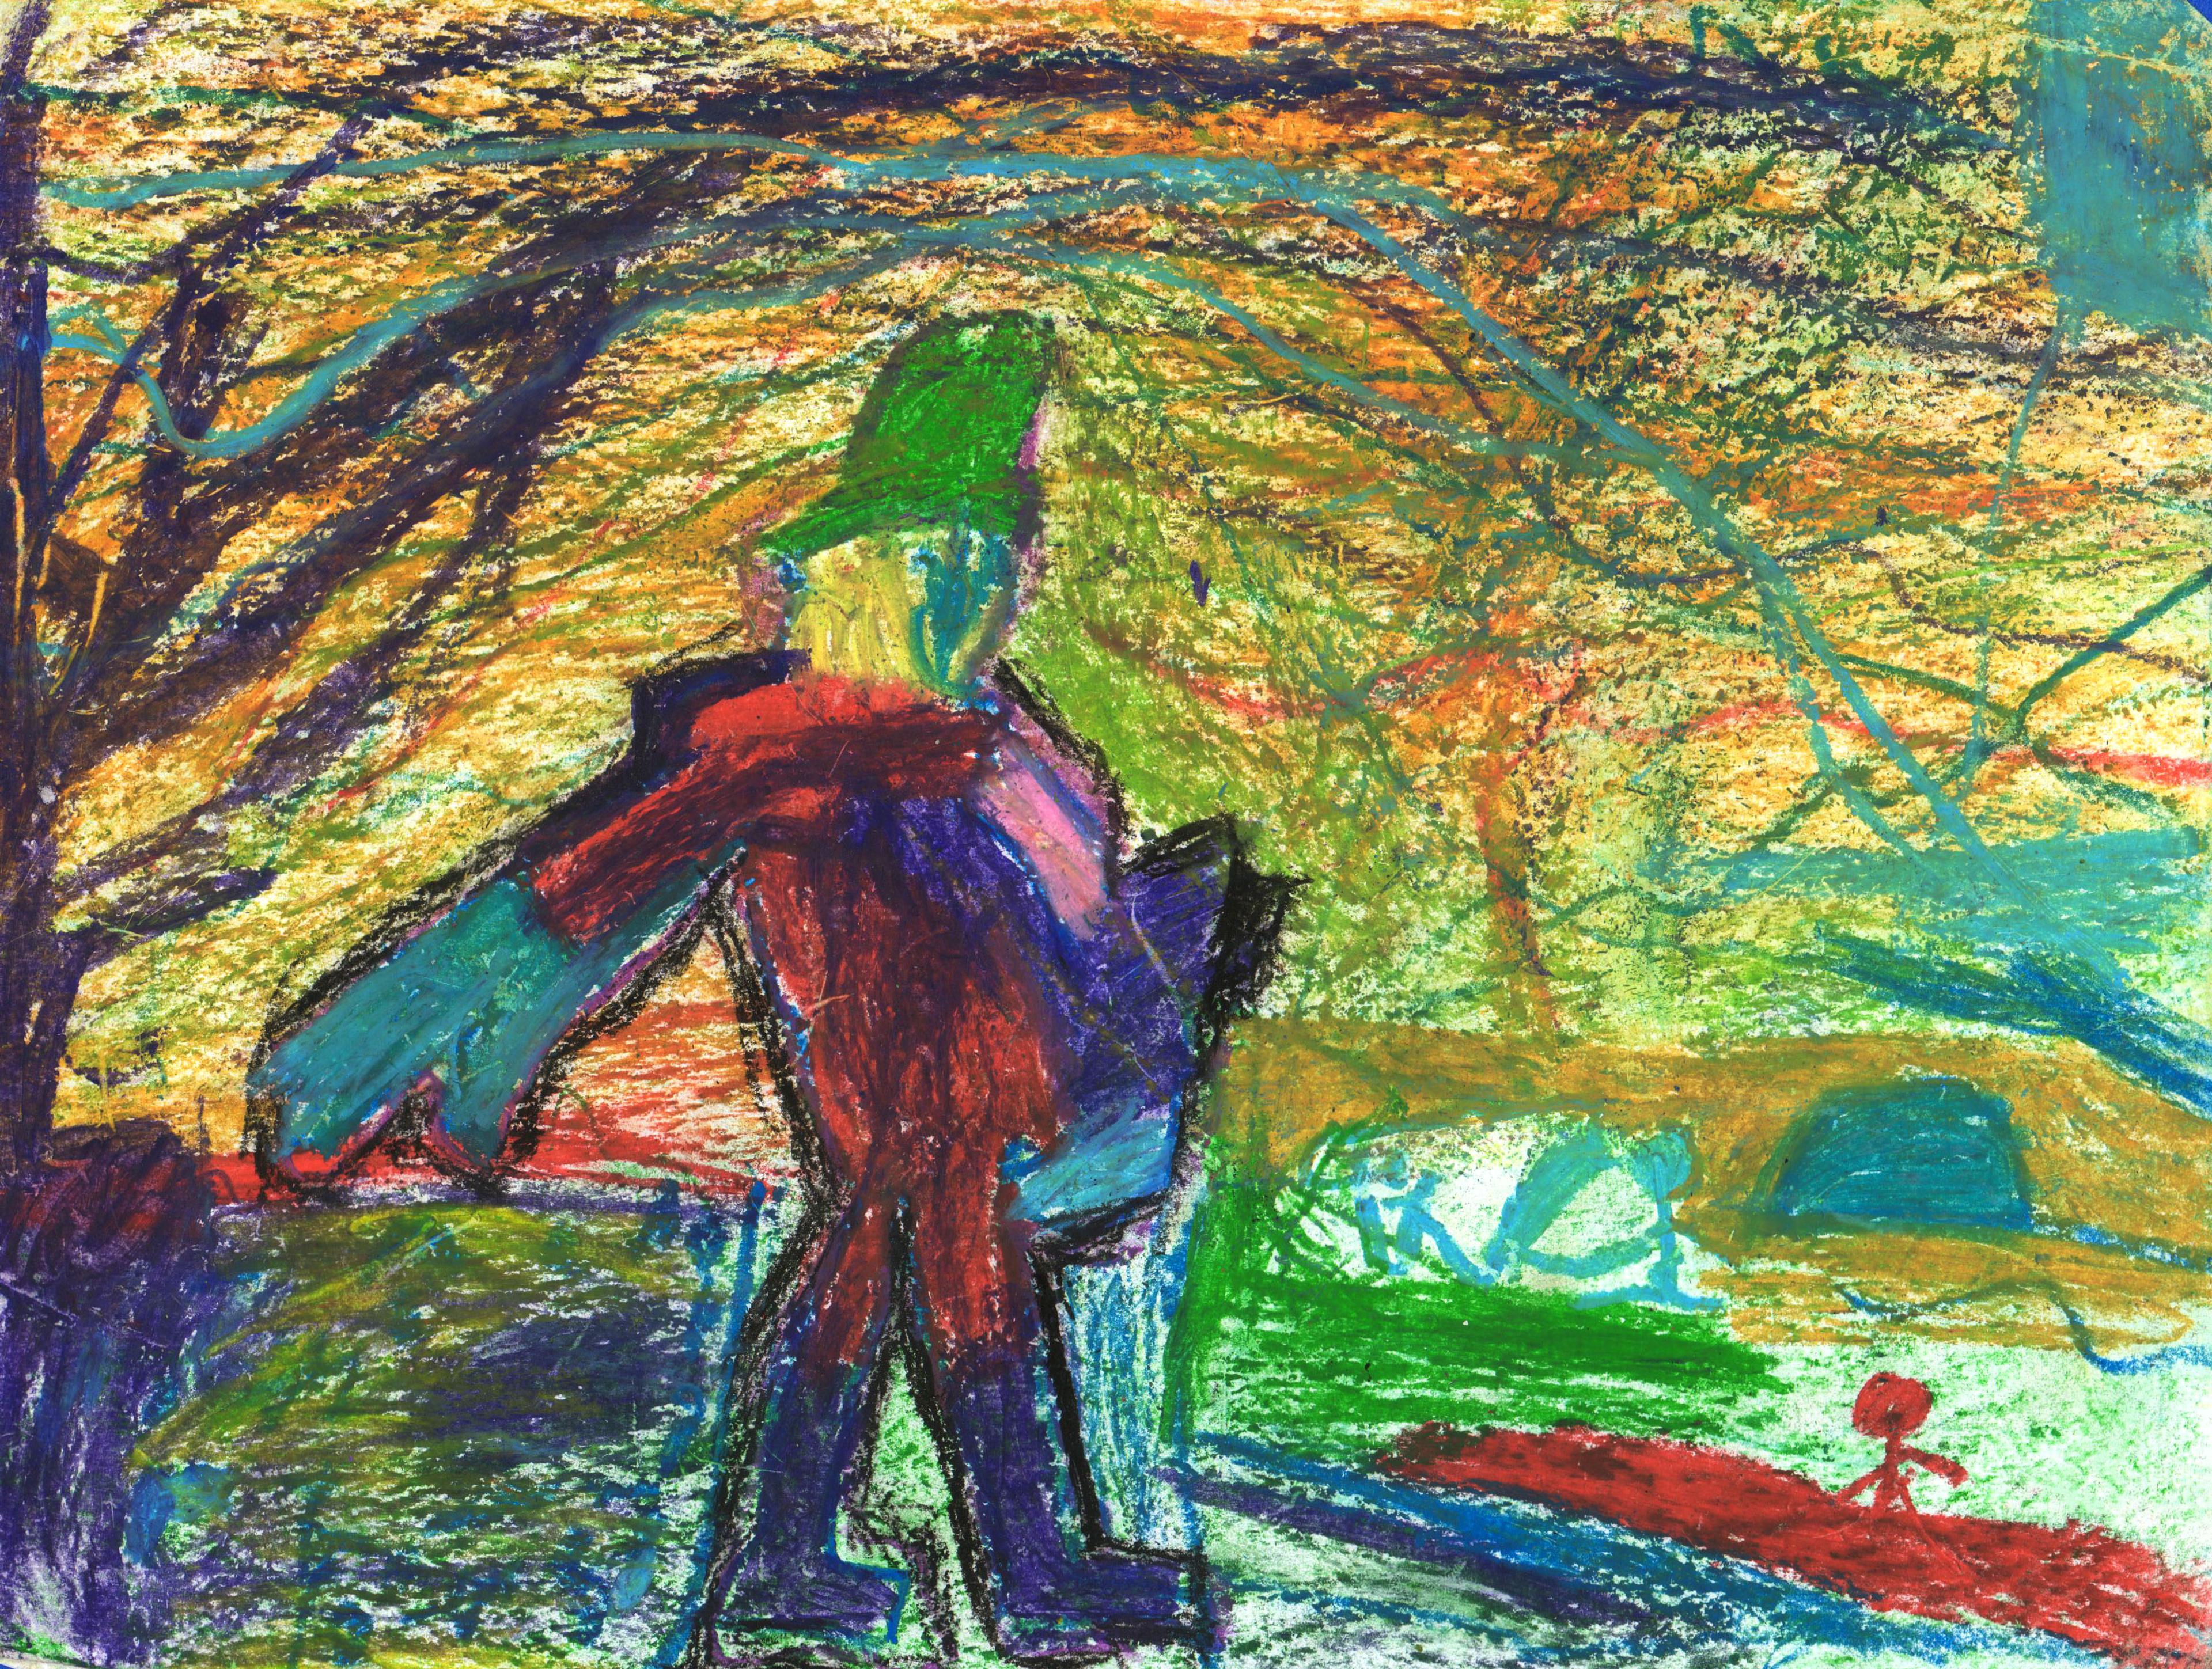 Pastel drawing of a figure taking a broad stride from left to right across a field, with the dark branches of a leafless tree spreading overhead from the left edge of the image. The figure wears blue pants, a red and blue coat, teal gloves, and a tall green hat upon a blue head with blond hair. A yellow and orange sky overhead is laced with teal pastel strokes. The walking figure gazes right to a small, red stick figure who stands on a red patch of ground in the distance.